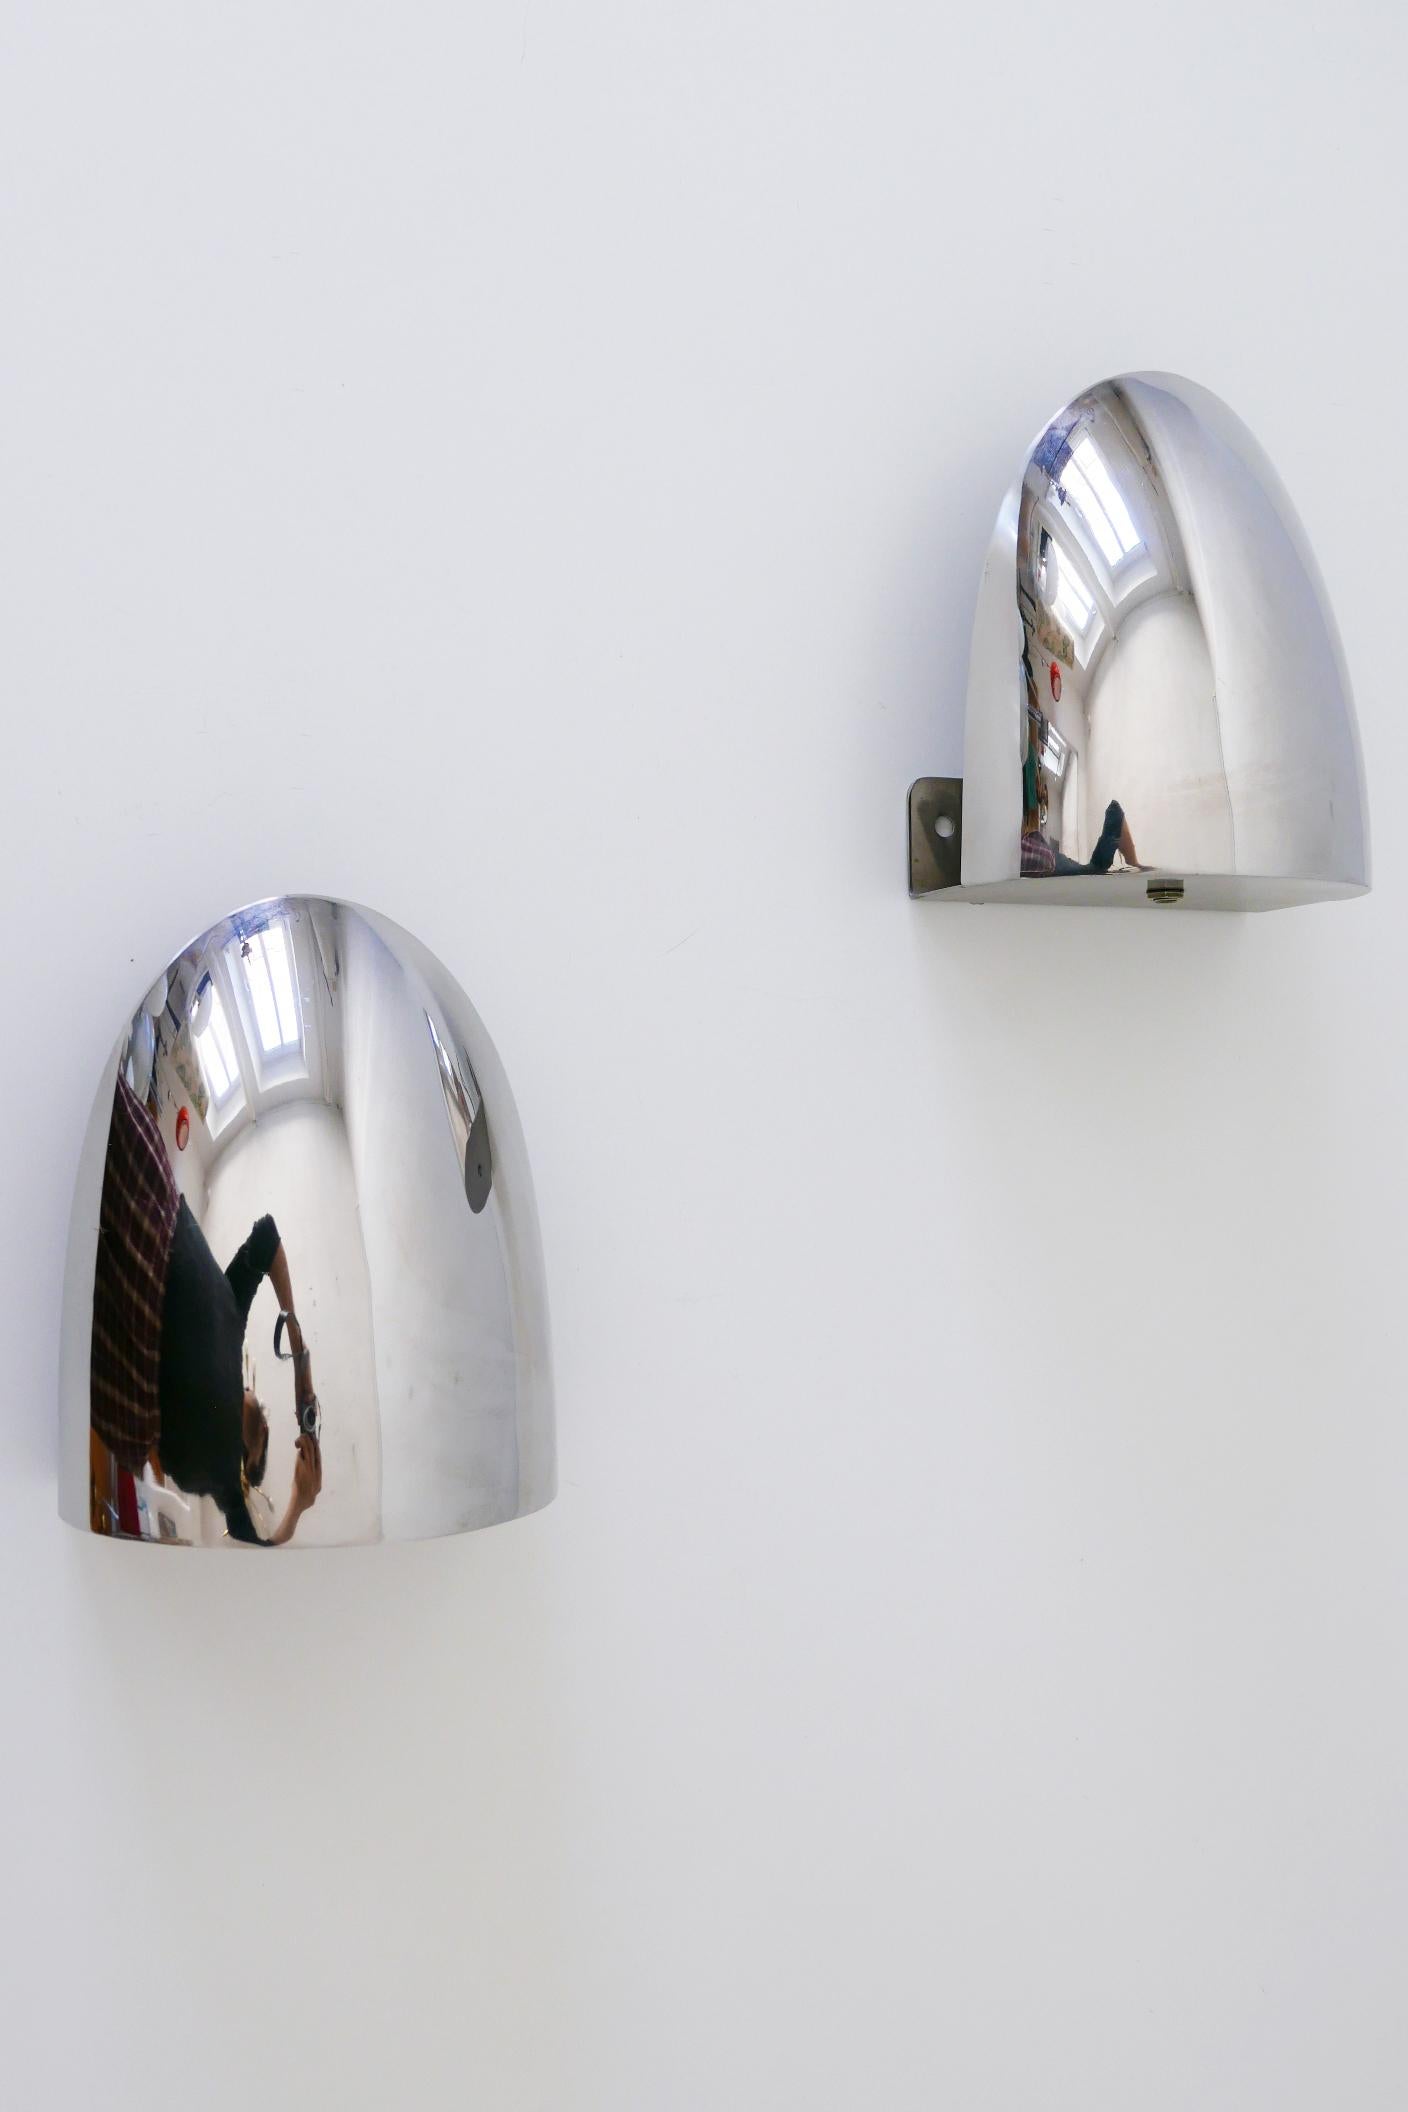 Set of Two Mid-Century Modern Wall Lamps or Sconces, 1970s, Germany For Sale 8